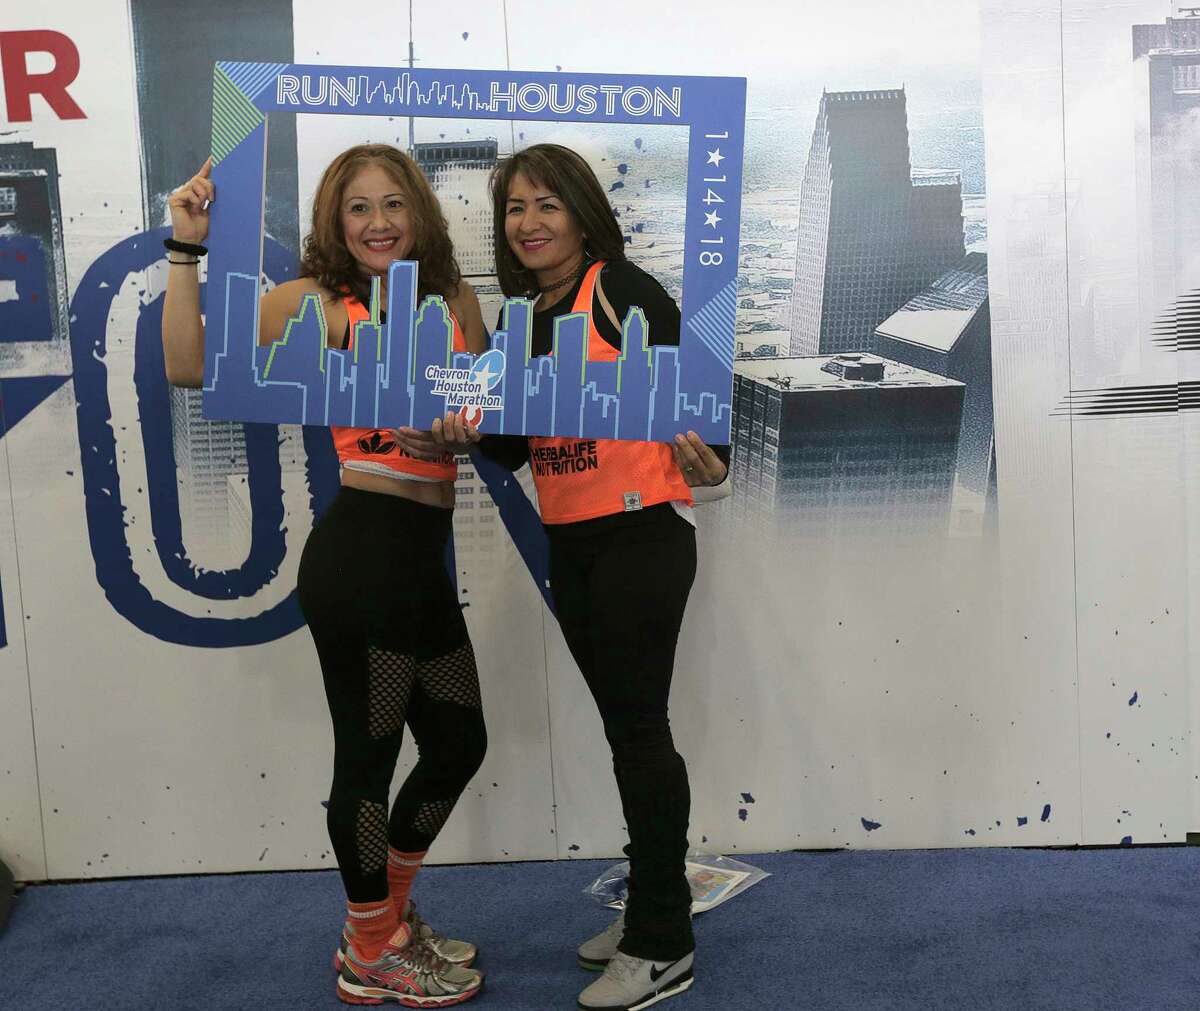 Blanca Villarreal, left, and Erika Clemente pose for a photo in the expo for the 2018 Chevron Houston Marathon and Aramco Houston Half Marathon at George R. Brown Convention Center on Friday, Jan. 12, 2018, in Houston. ( Elizabeth Conley / Houston Chronicle )